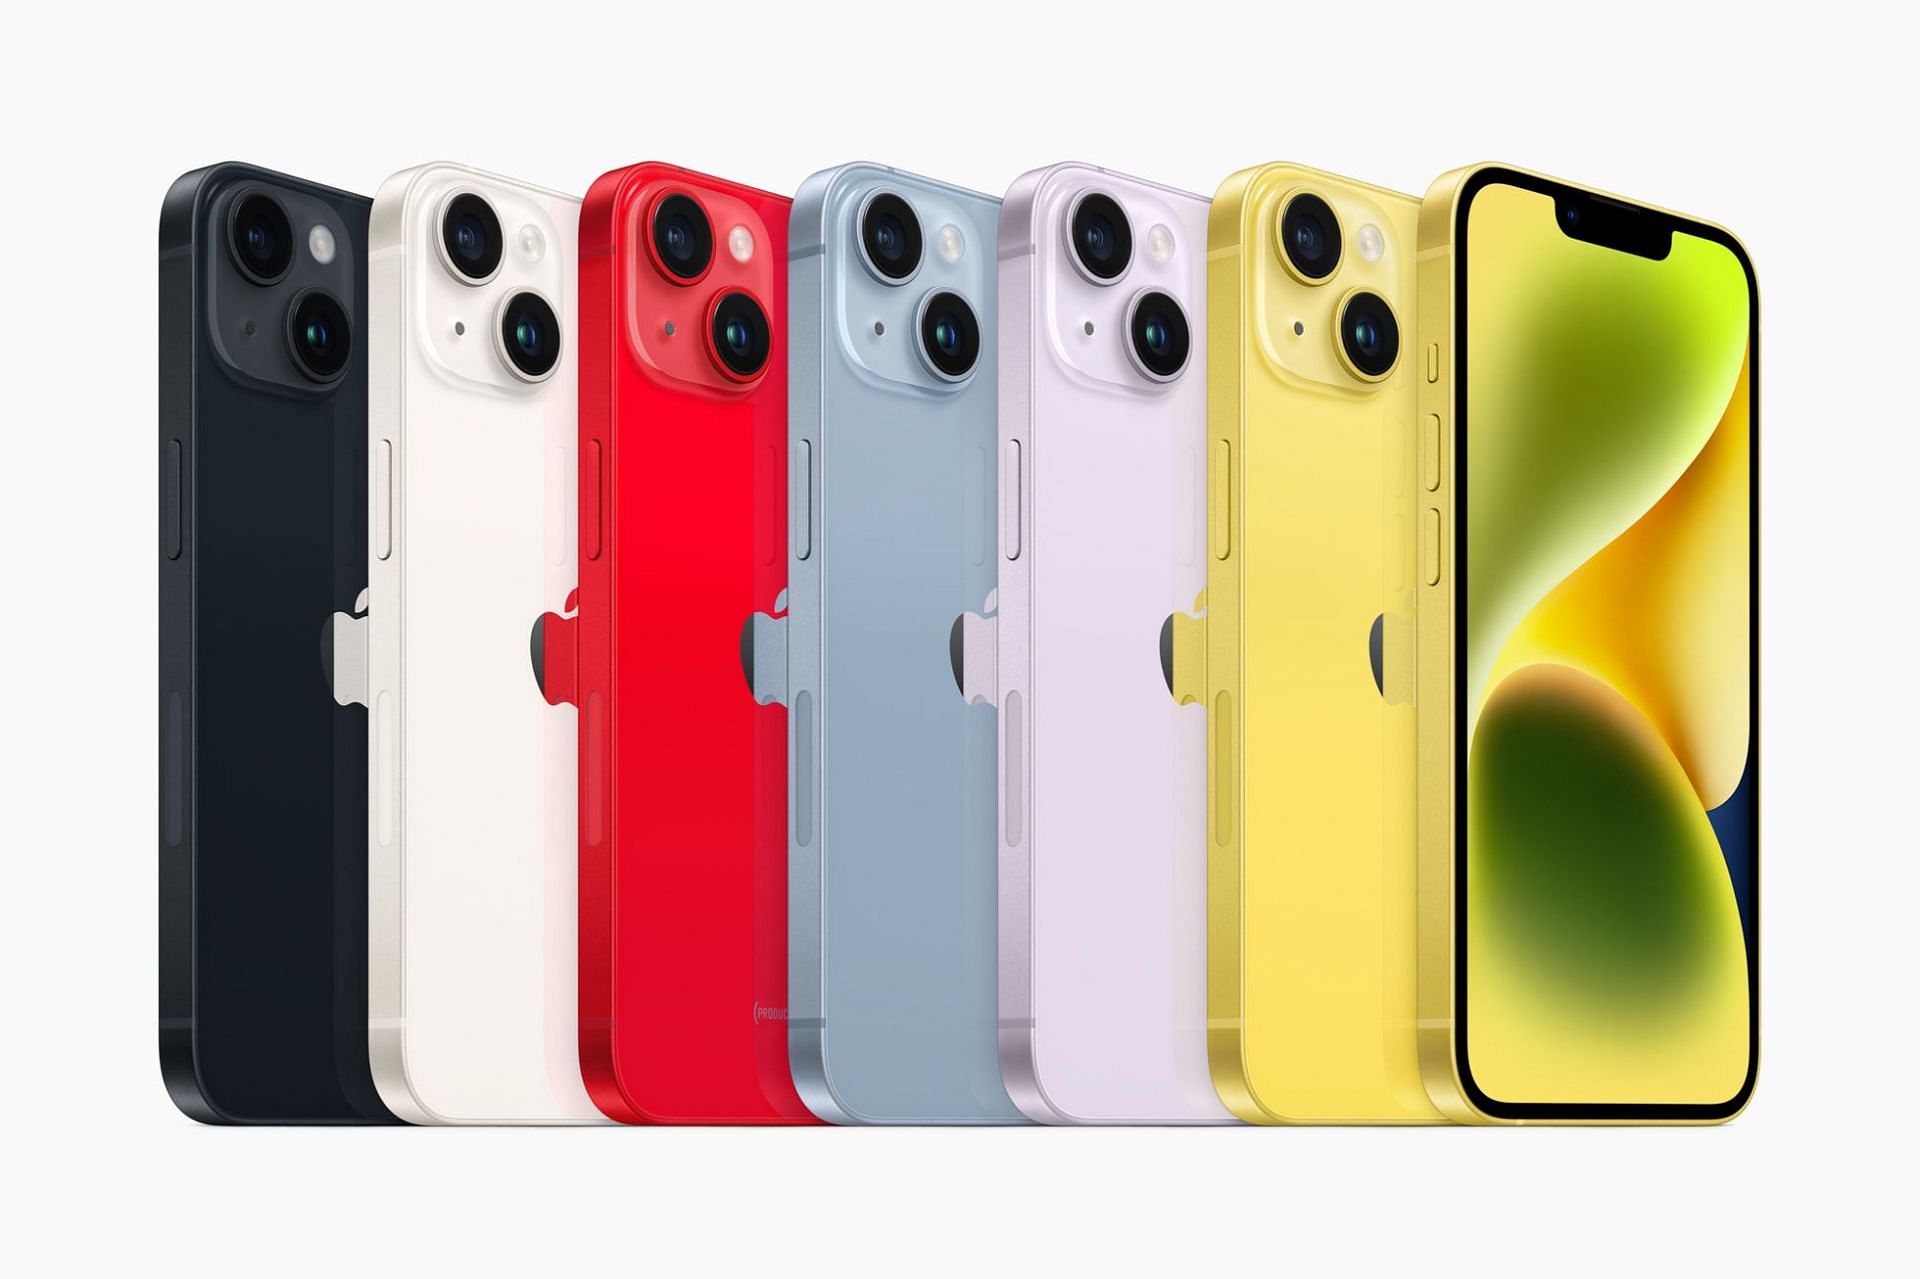 The Apple iPhone 14 is available in multiple colorways (Image via Apple)